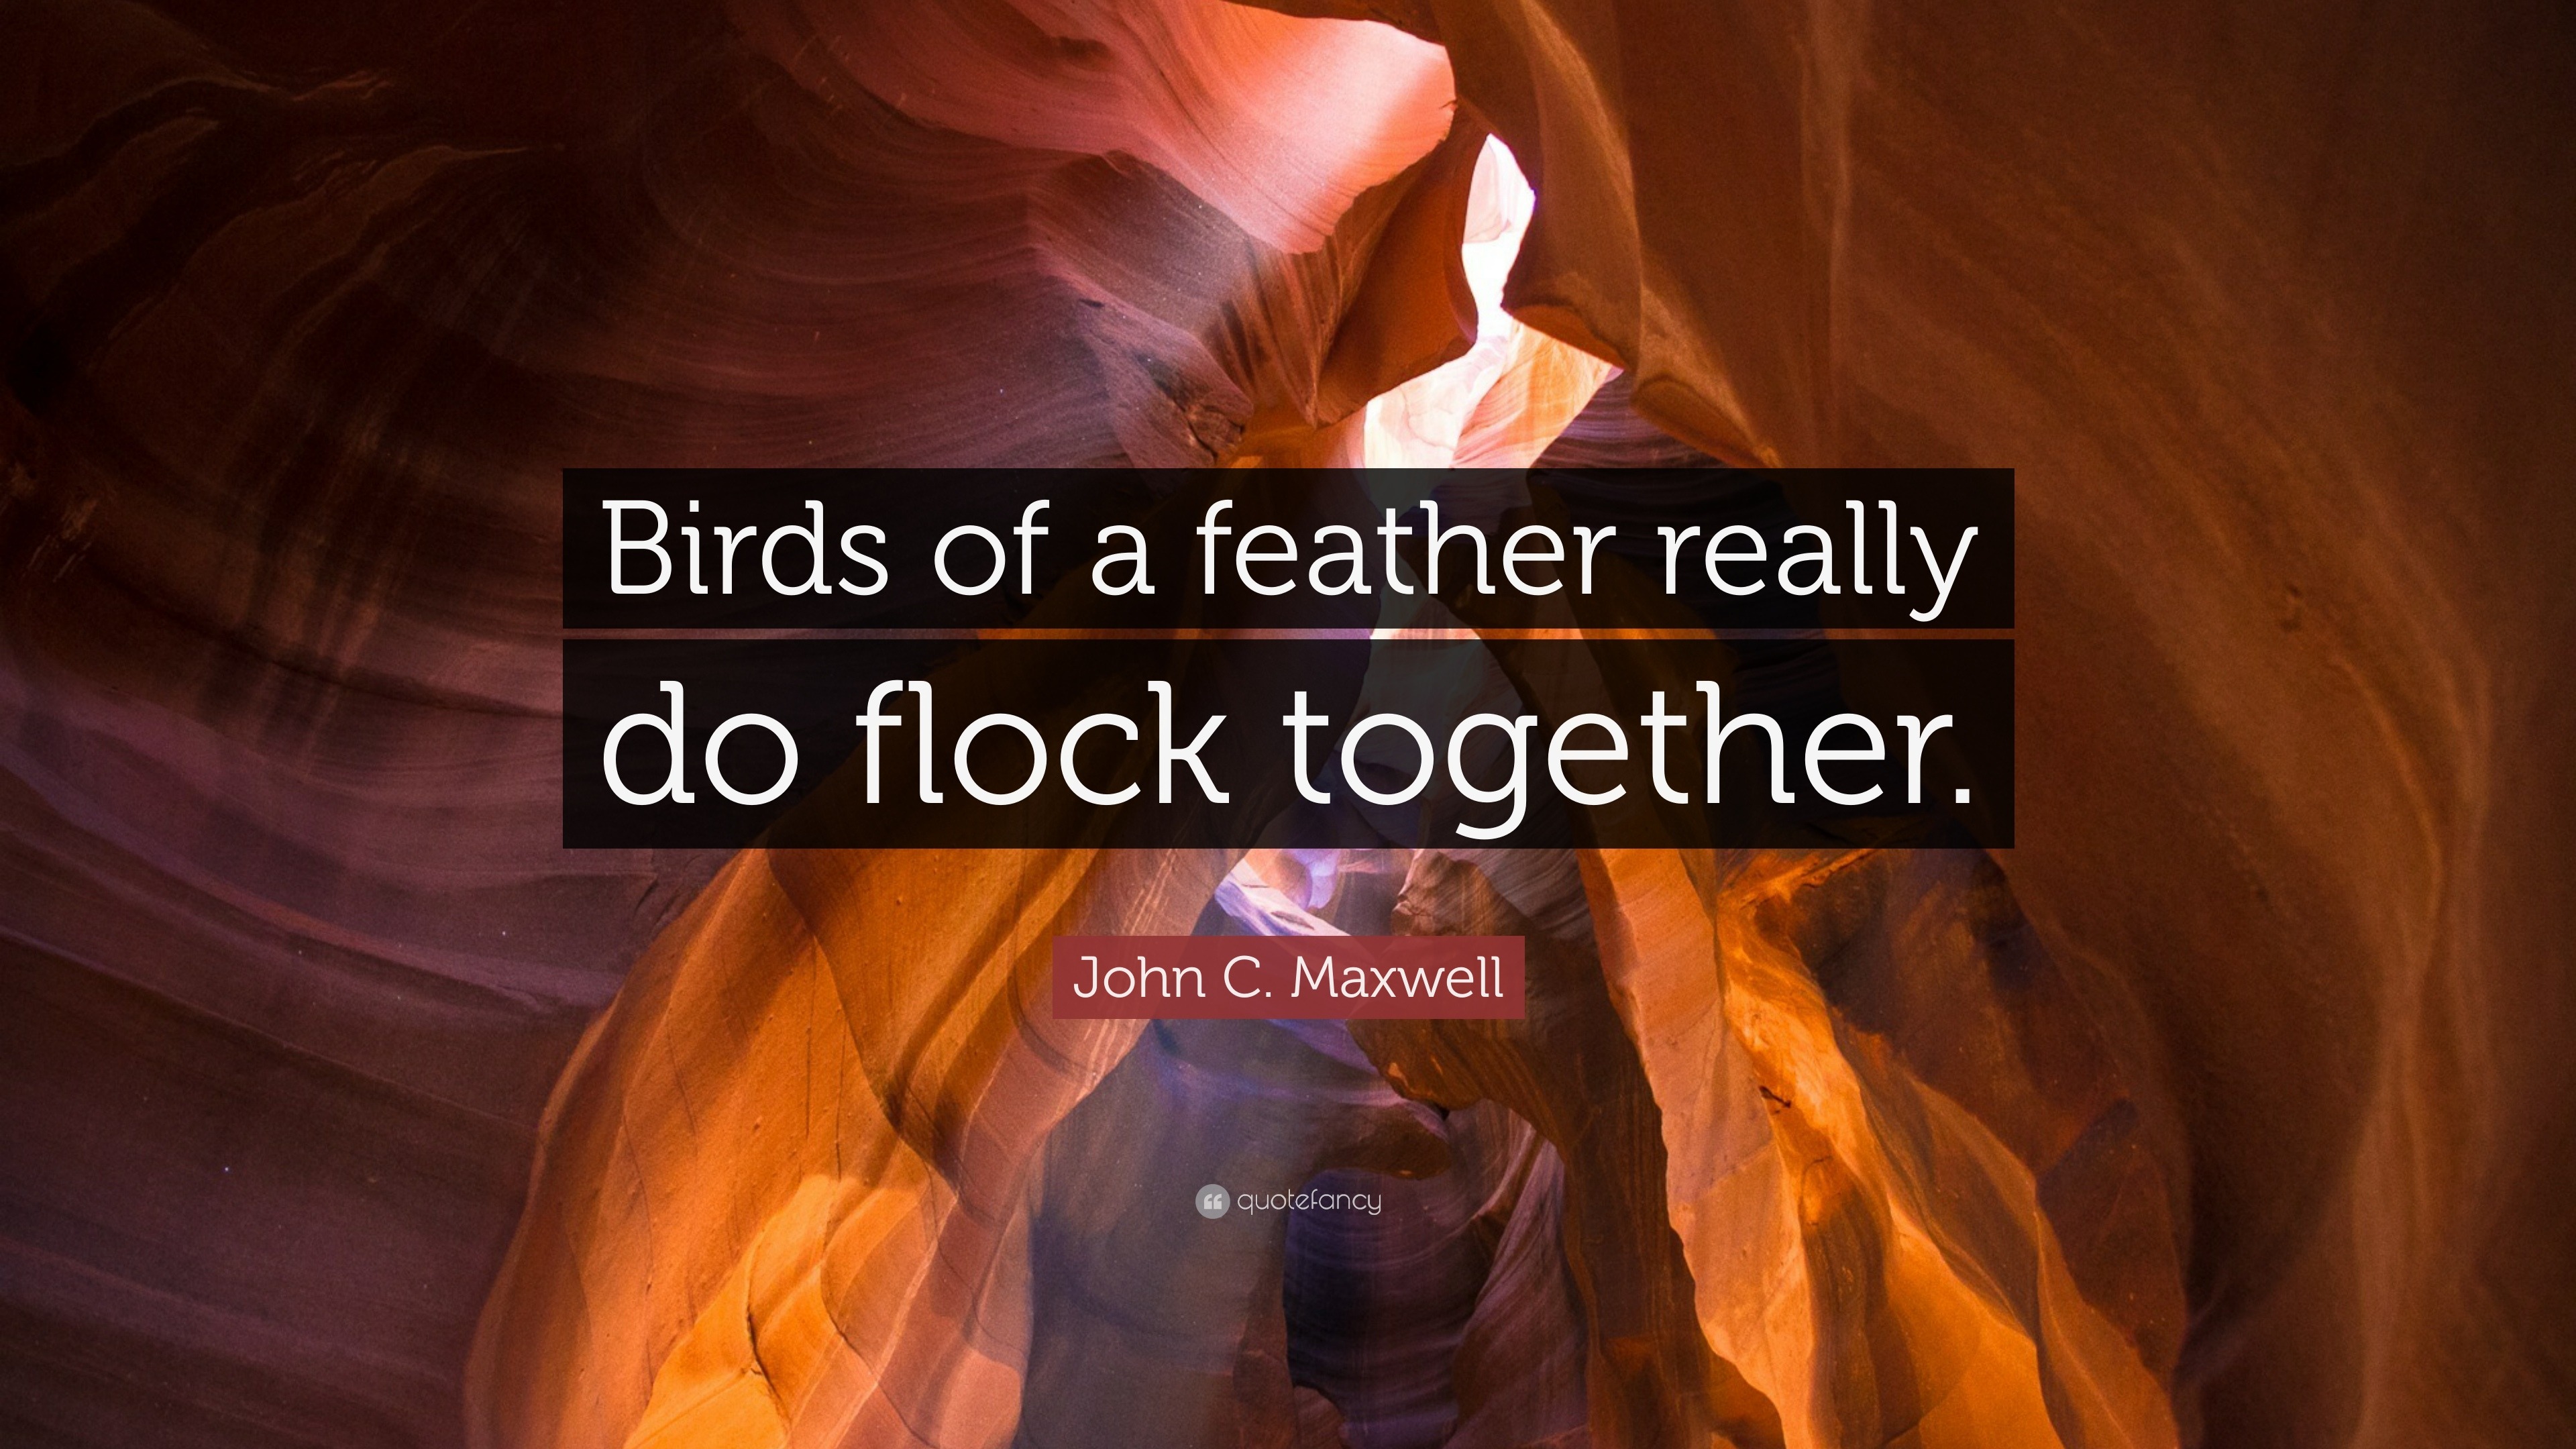 John C. Maxwell Quote “Birds of a feather really do flock together.”